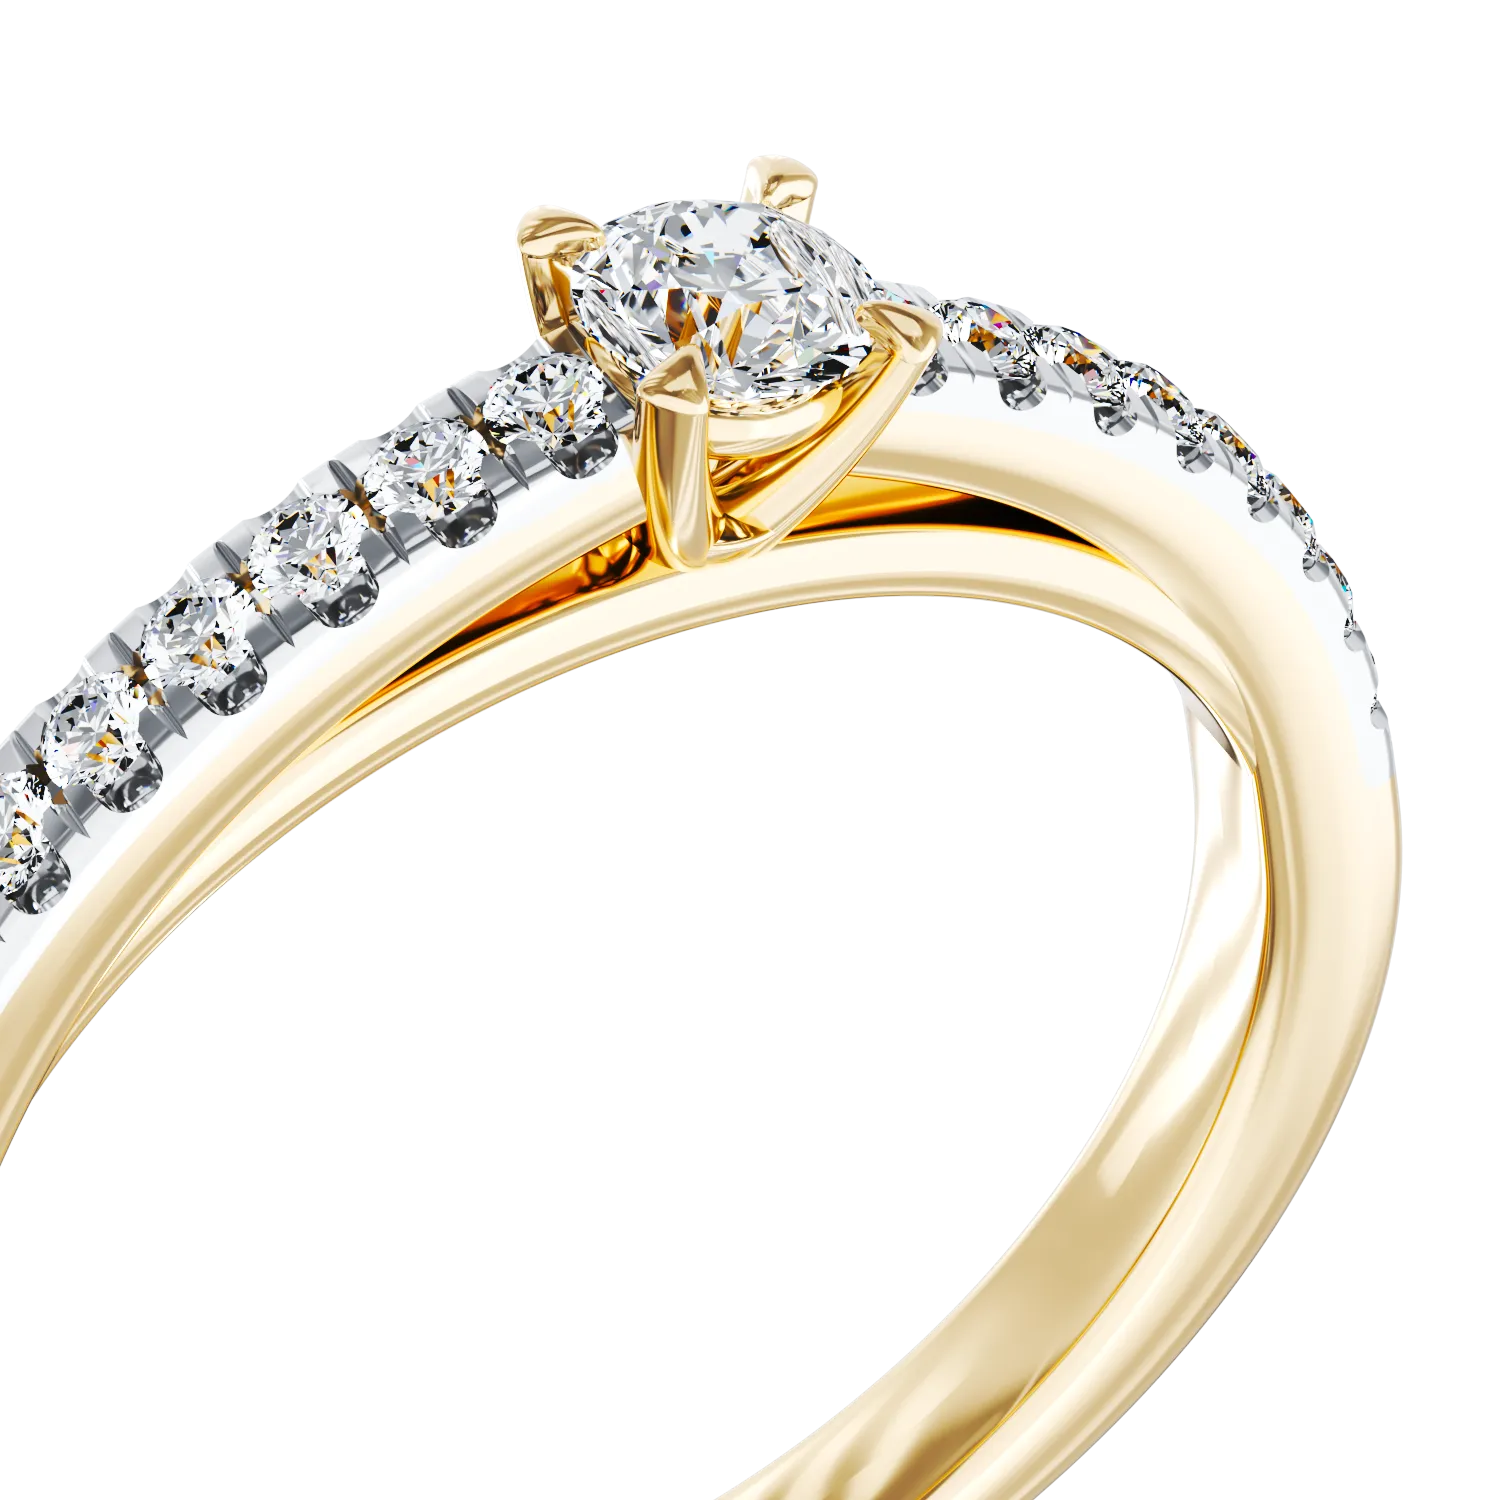 18K yellow gold engagement ring with 0.112ct diamond and 0.148ct diamond